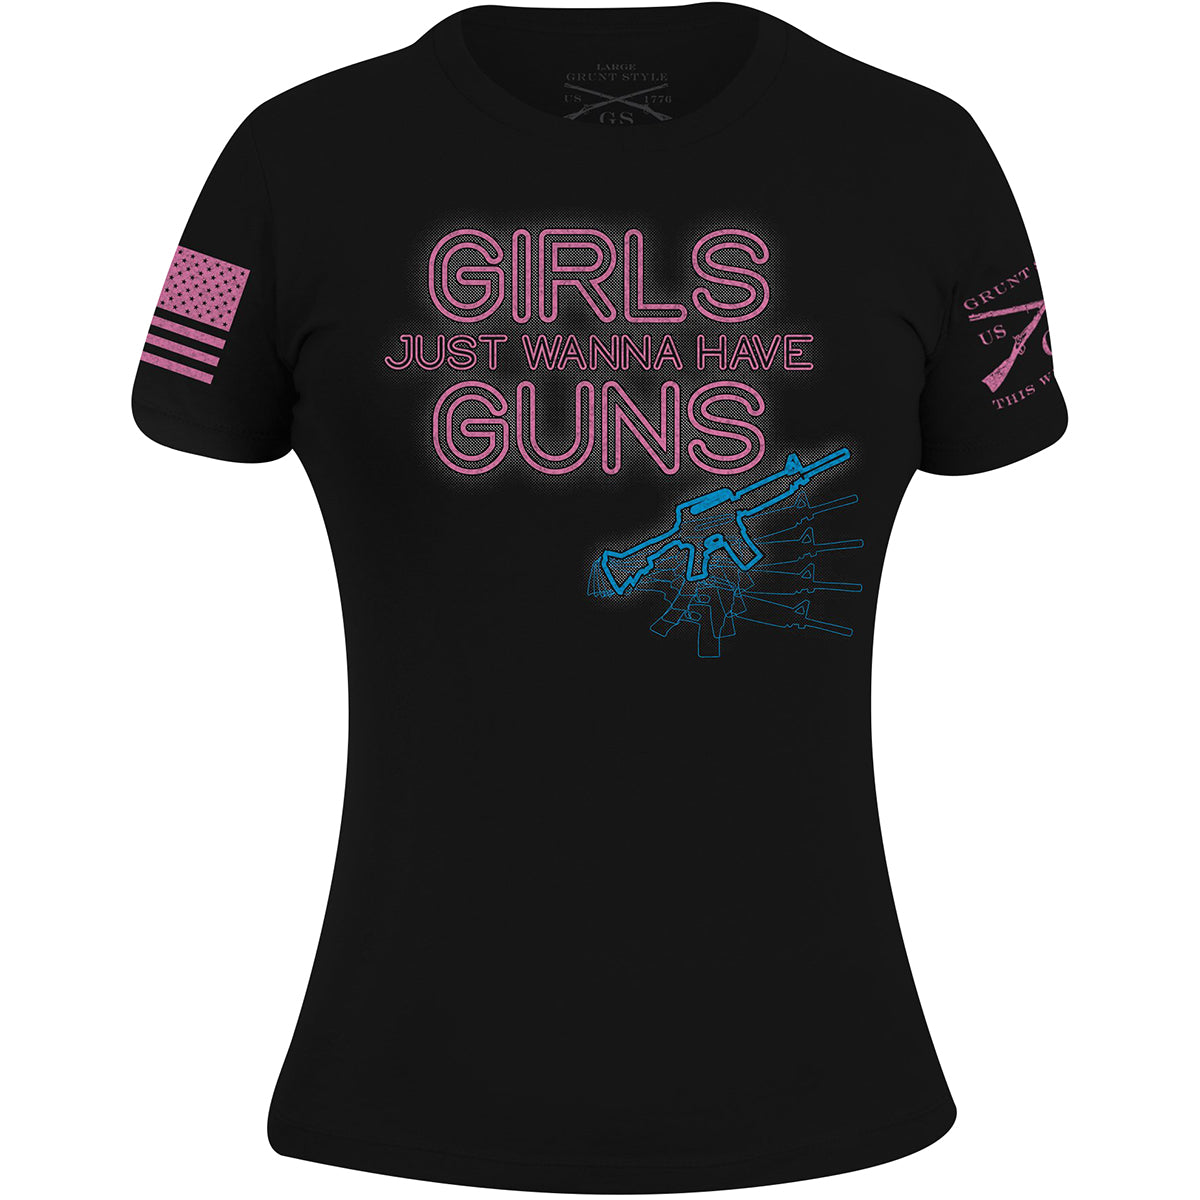 Girls Just Want To Have Guns